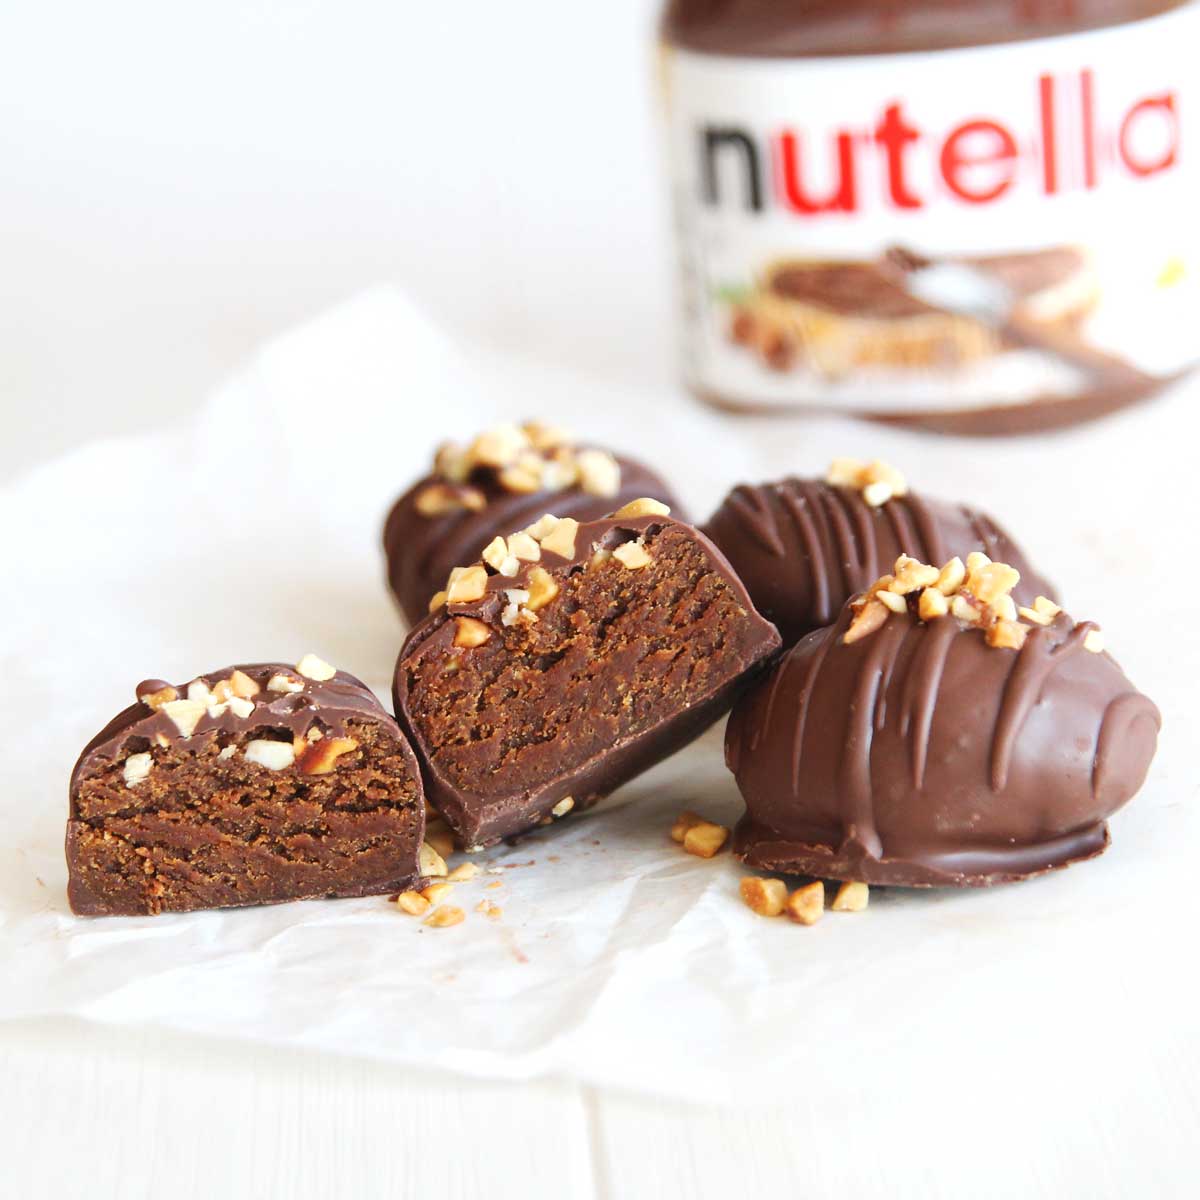 Healthier Nutella Chocolate Easter Eggs Made with PB Powder - Raspberry White Chocolate Scones